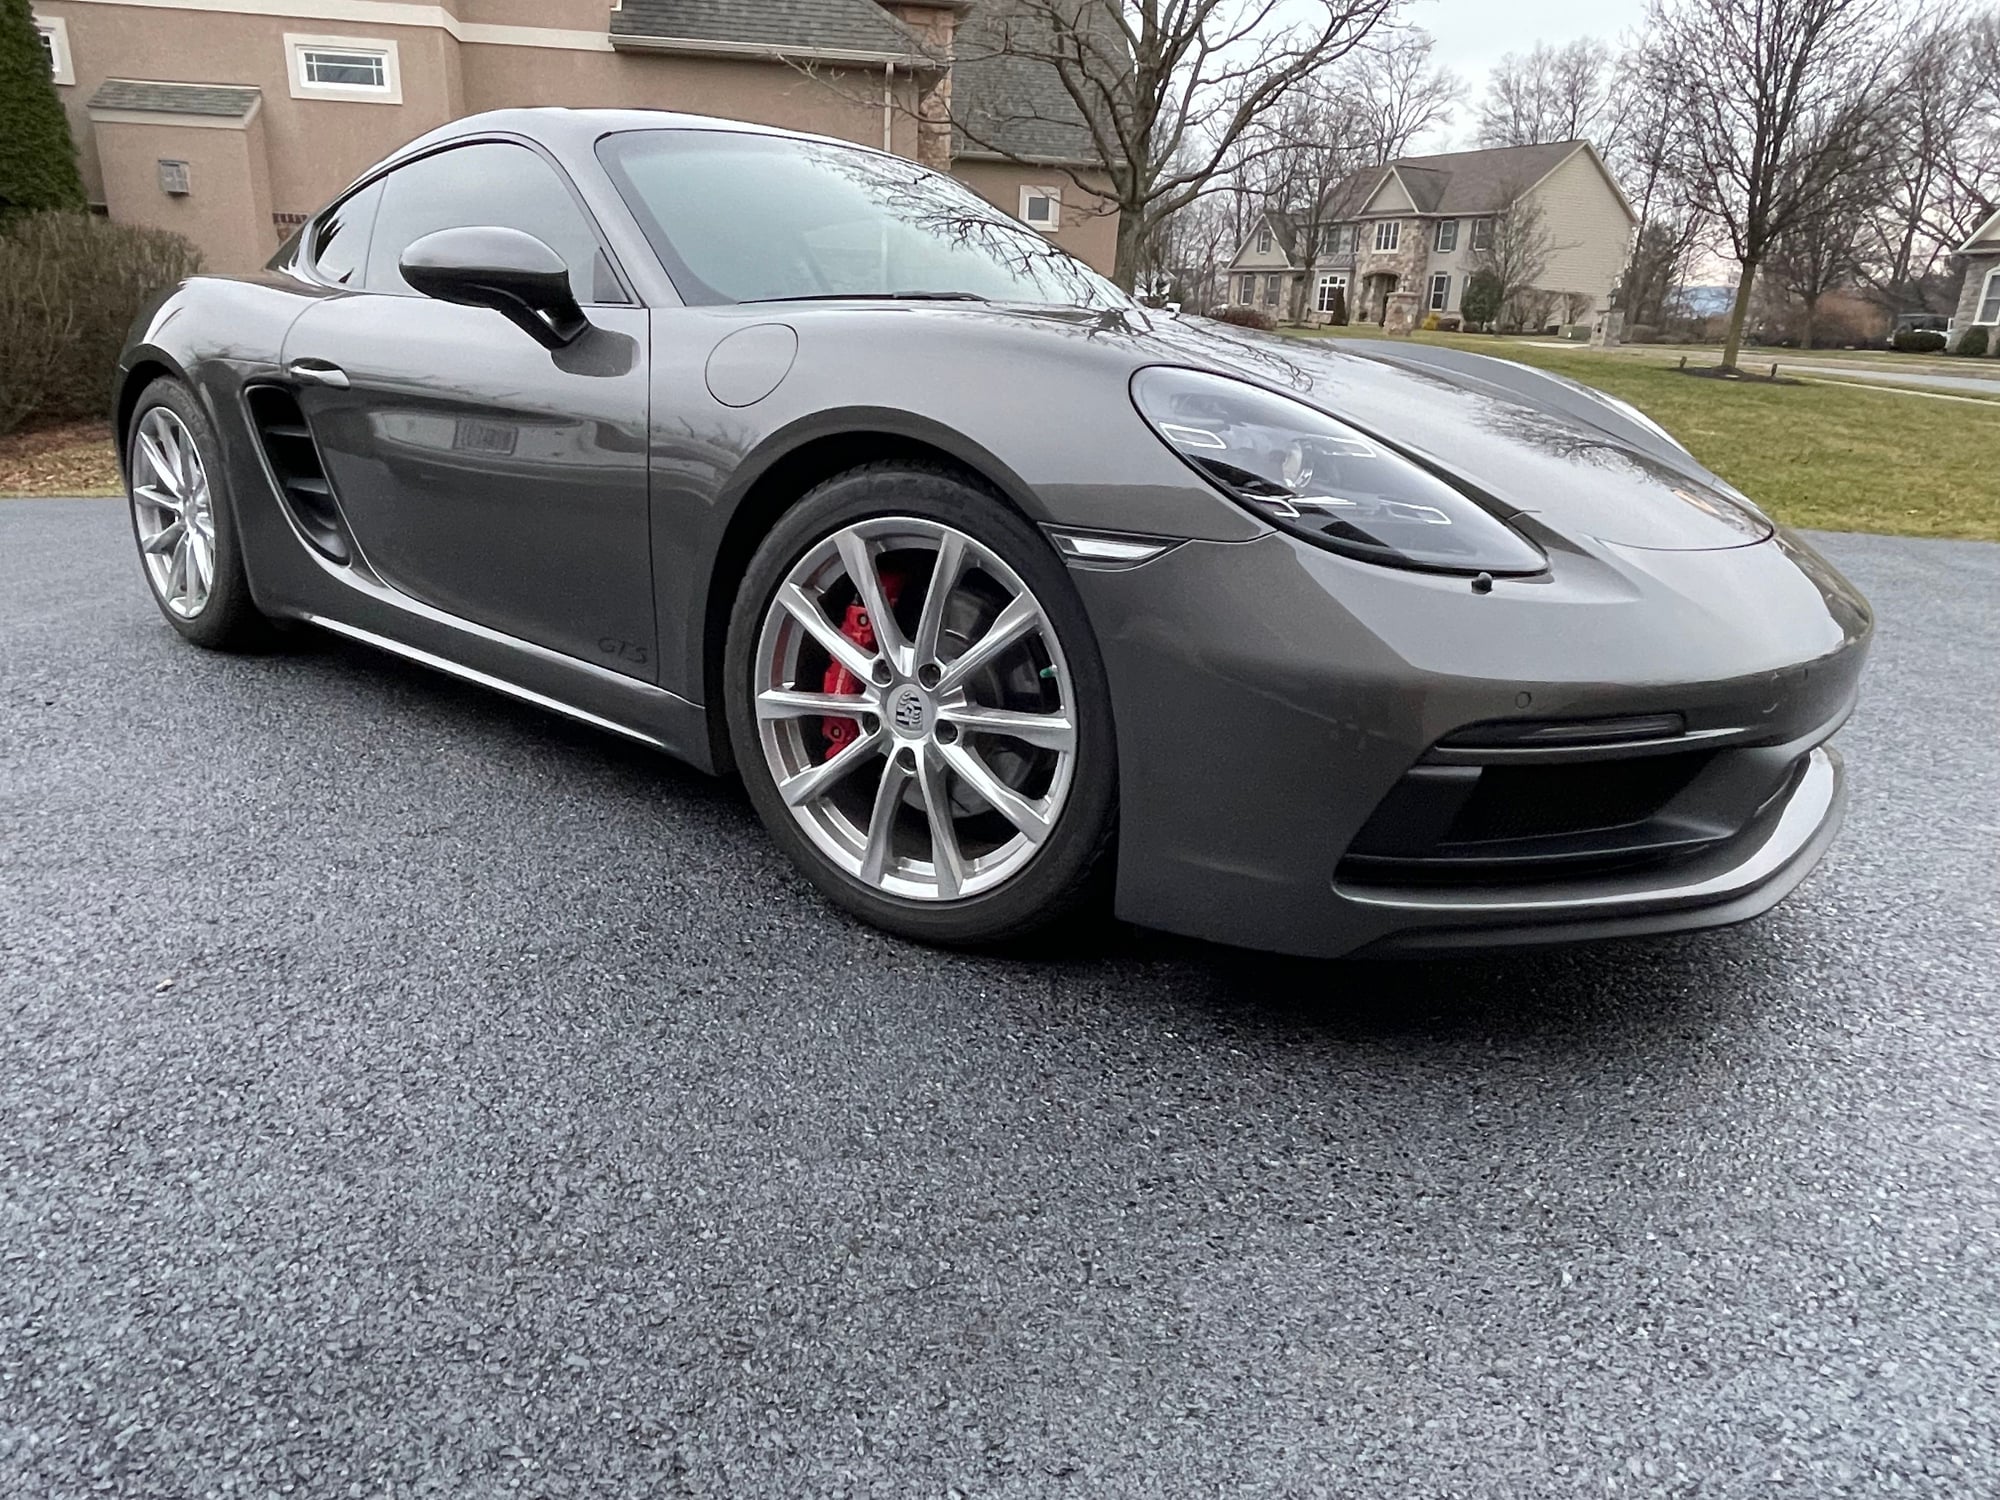 2018 Porsche 718 Cayman - 2018 Cayman GTS 2.5L - Used - VIN WP0AB2A8XJK279669 - 21,700 Miles - 4 cyl - 2WD - Automatic - Coupe - Gray - Harrisburg, PA 17112, United States